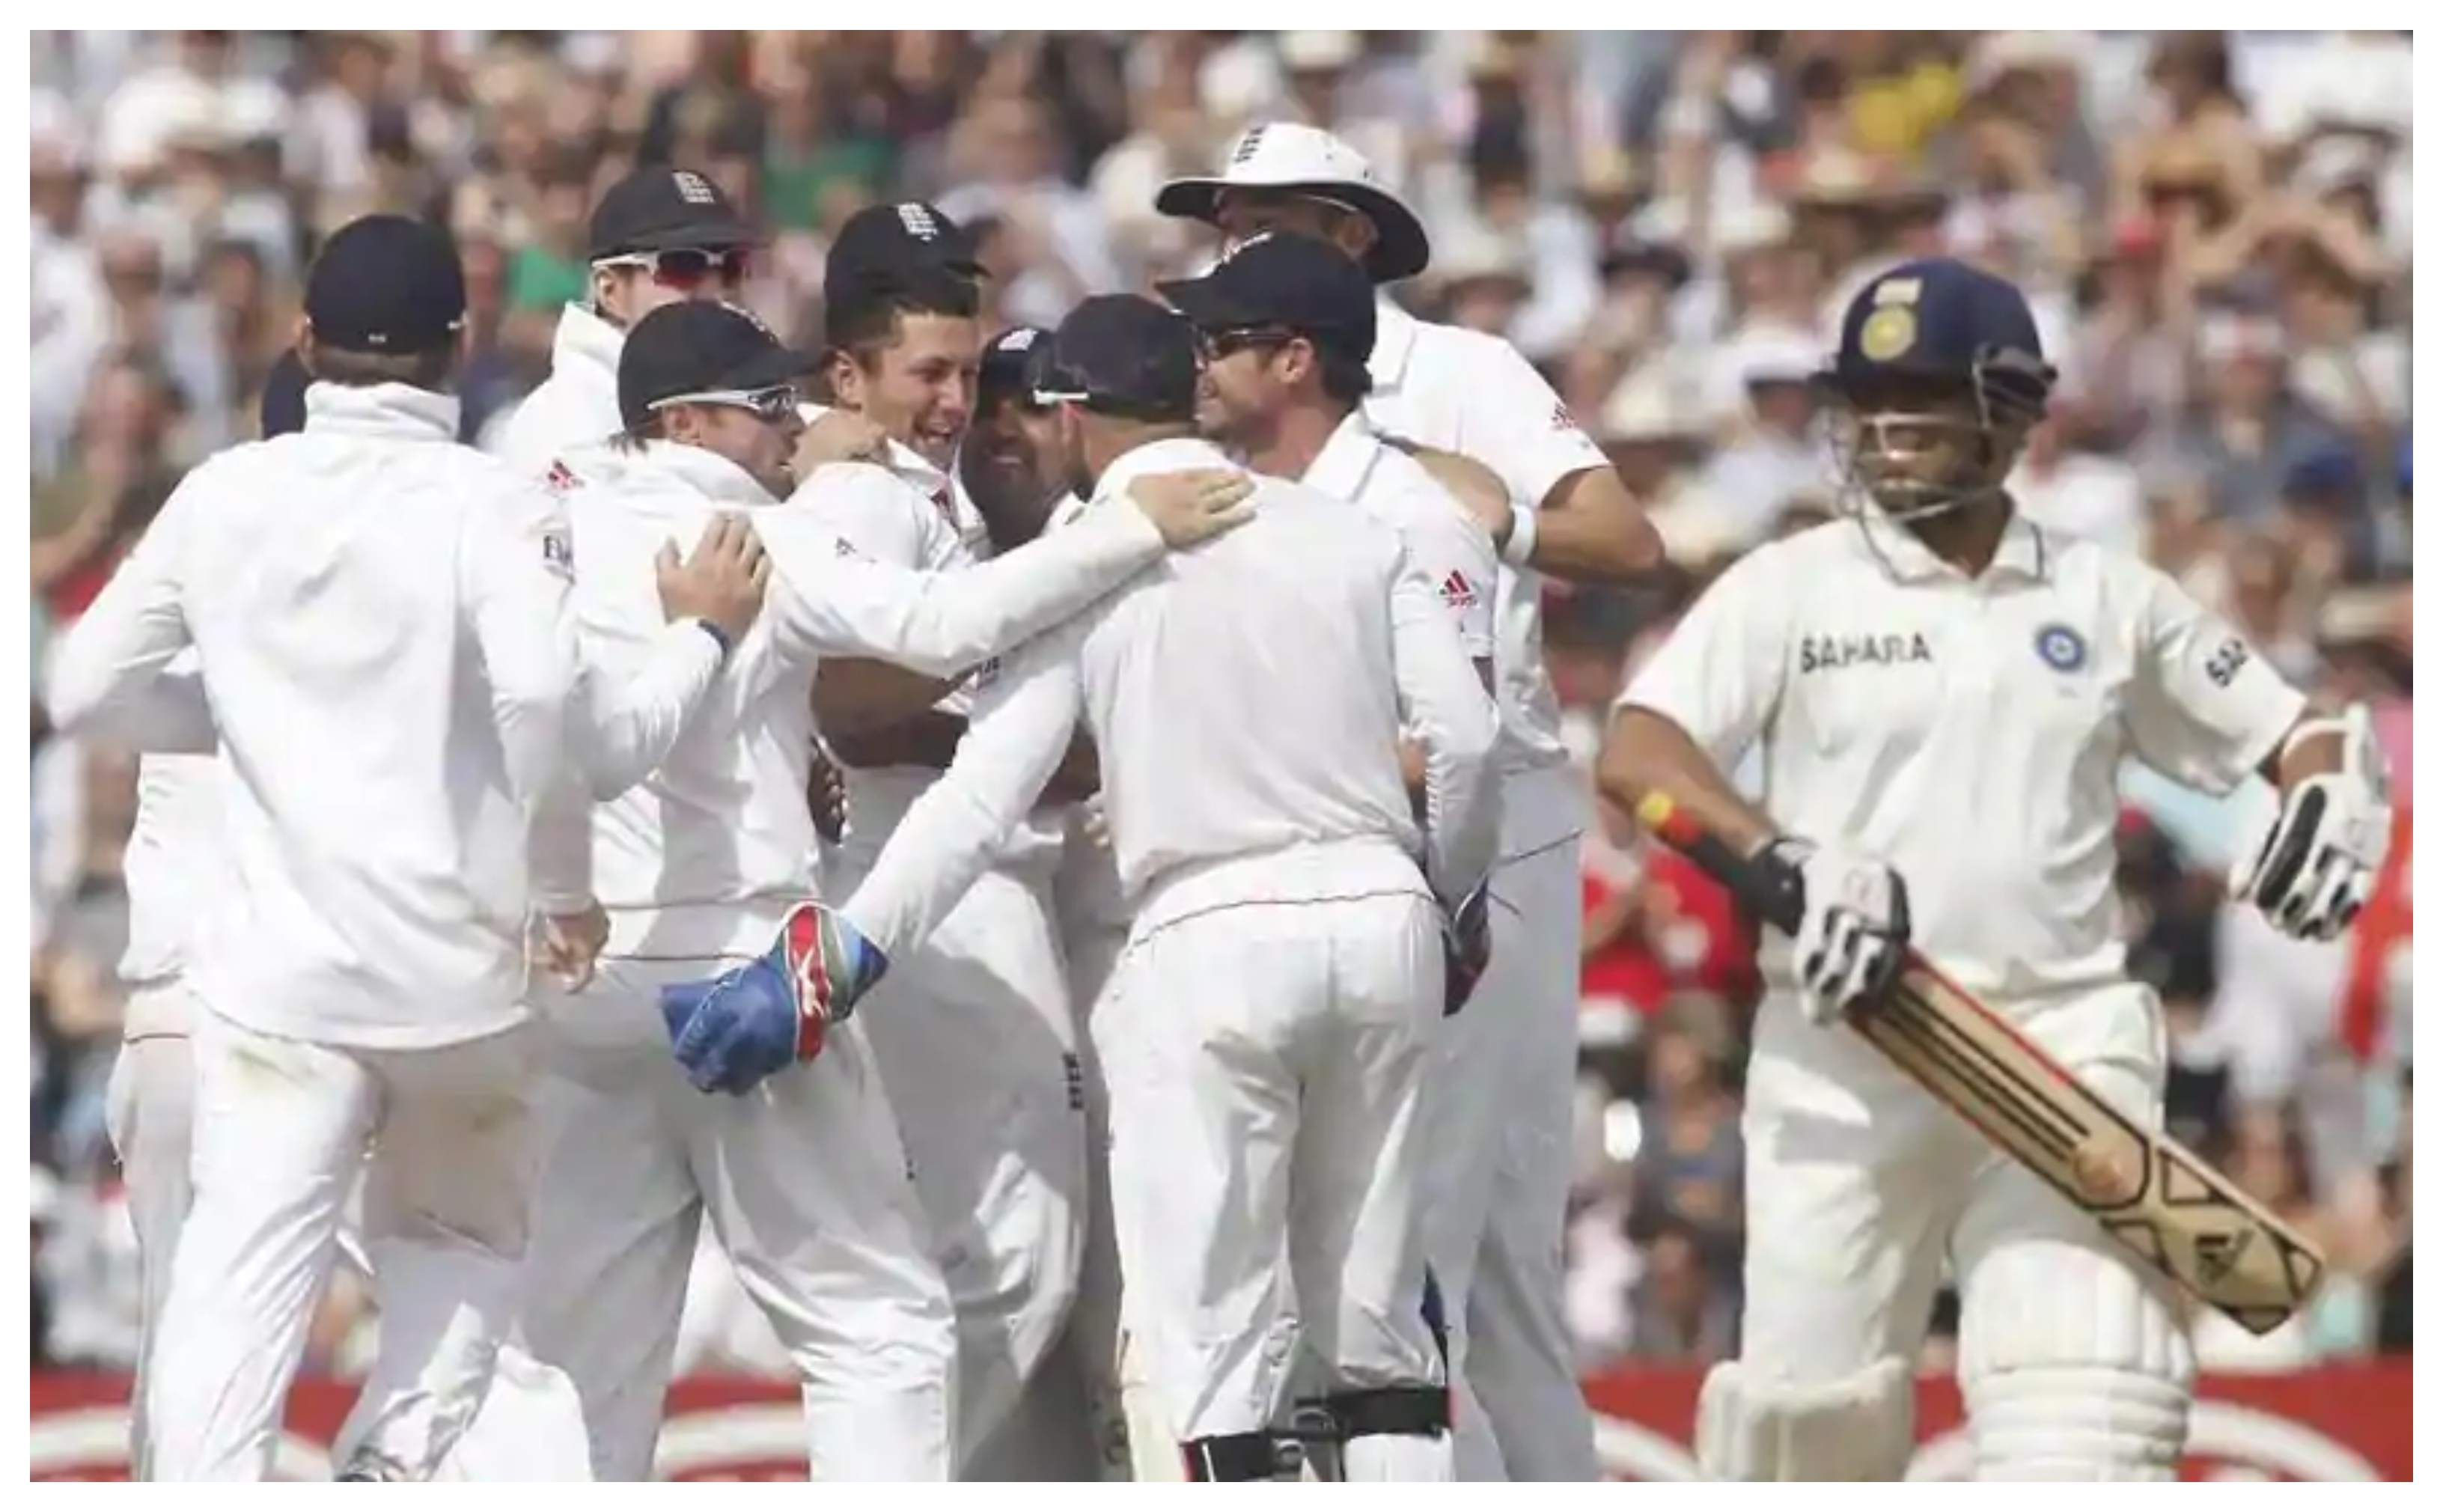 Bresnan celebrates with his teammates after taking the wicket of Tendulkar during 2011 Oval Test | Reuters